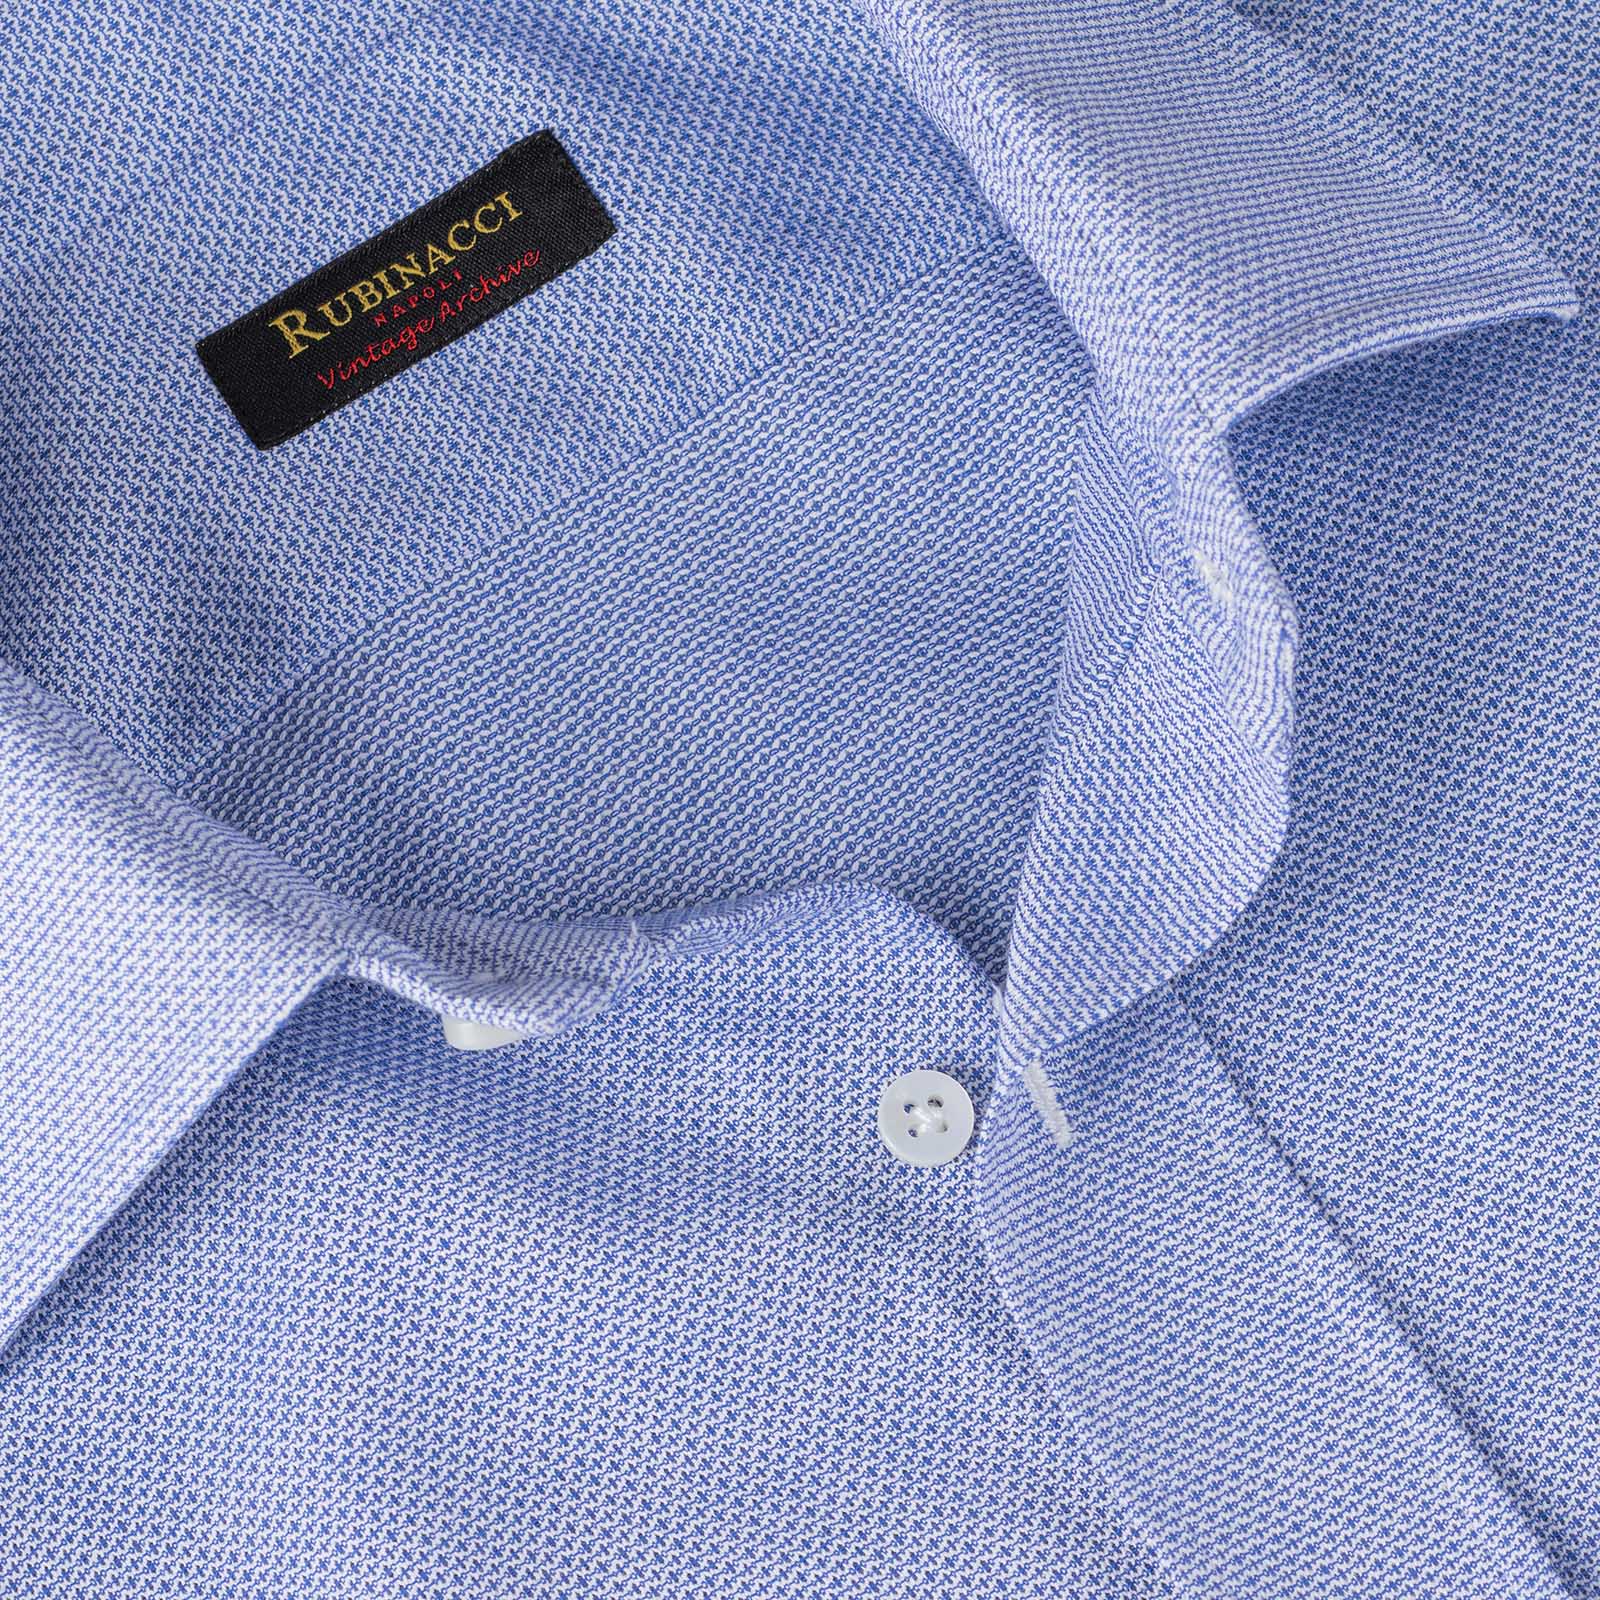 Mariano Rubinacci - Vintage archive white and blue linen shirt